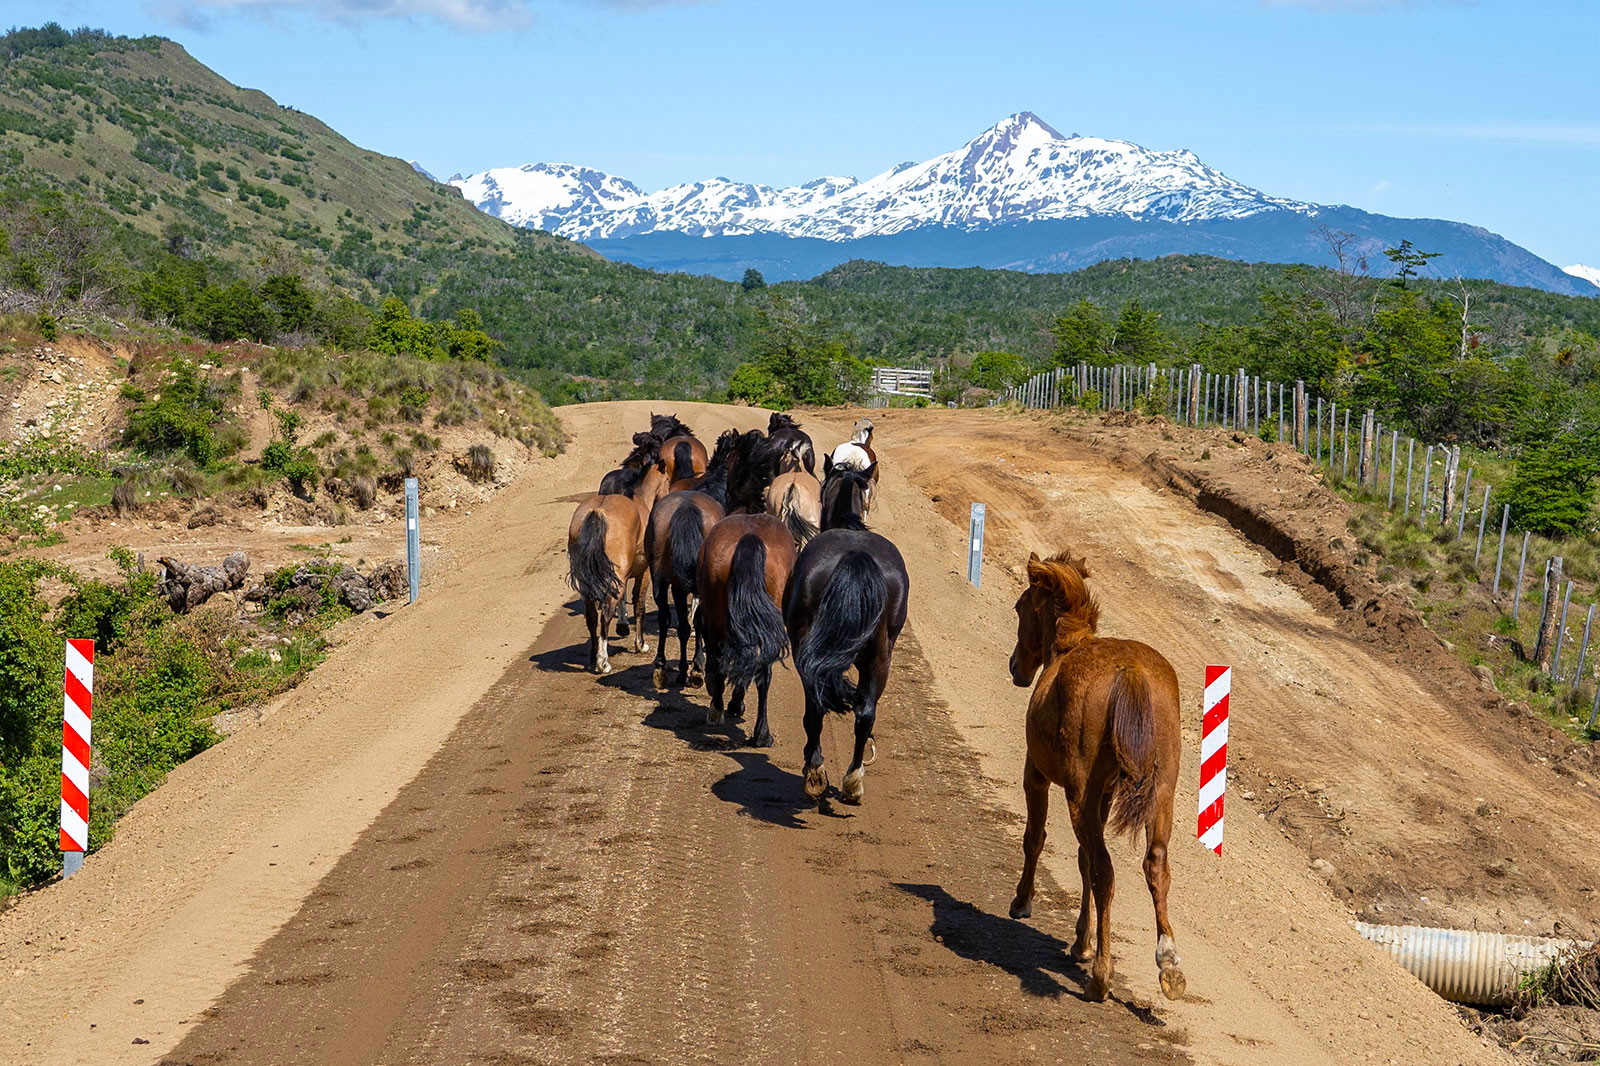 Wild horses run along a dirt road in Patagonia, Chile with blue, jagged mountains in the background.